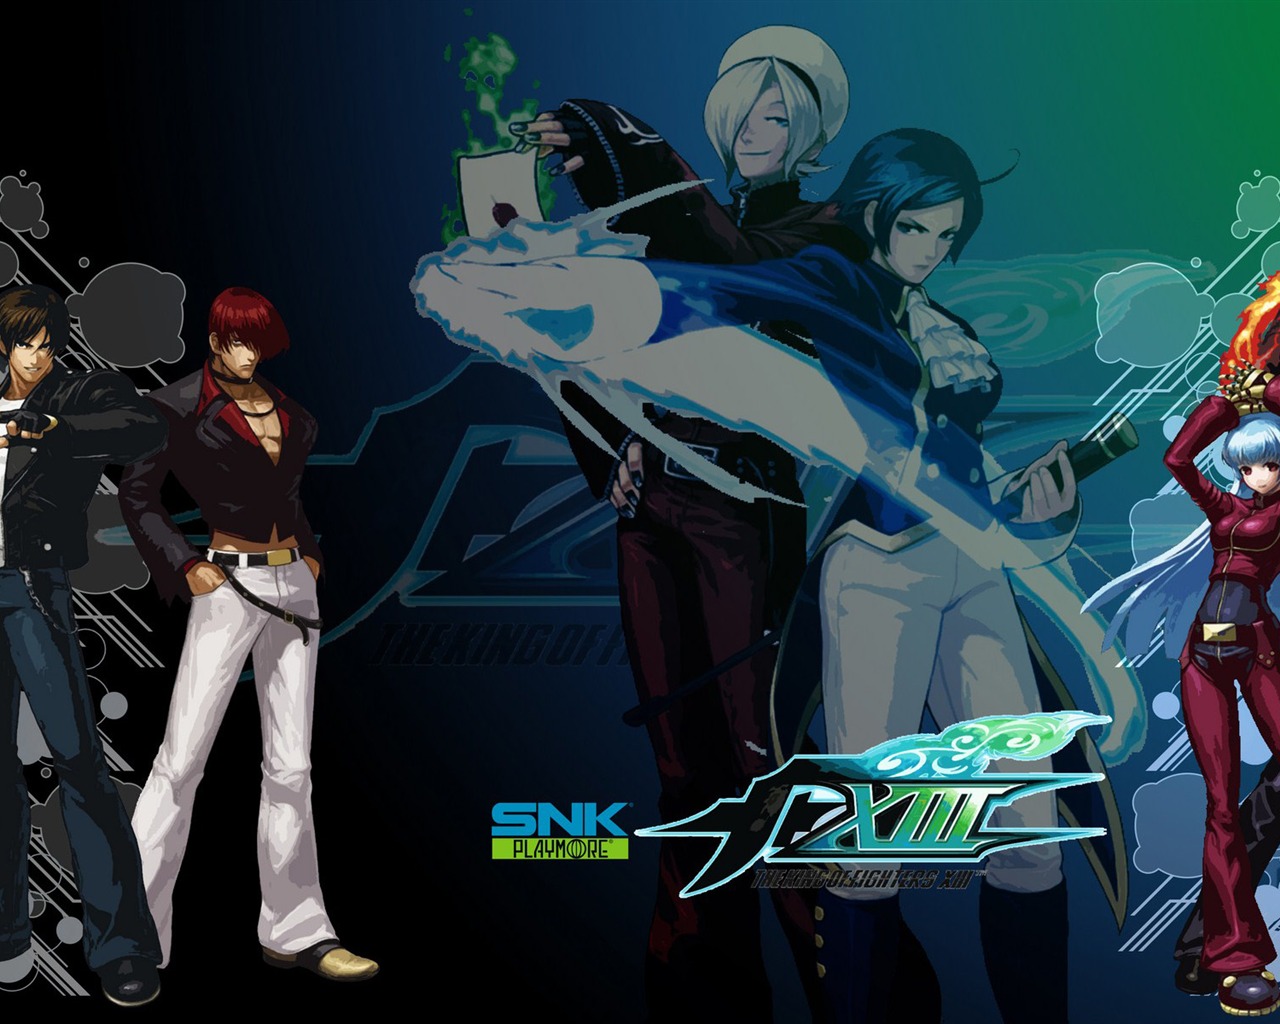 The King of Fighters XIII 拳皇13 壁纸专辑4 - 1280x1024